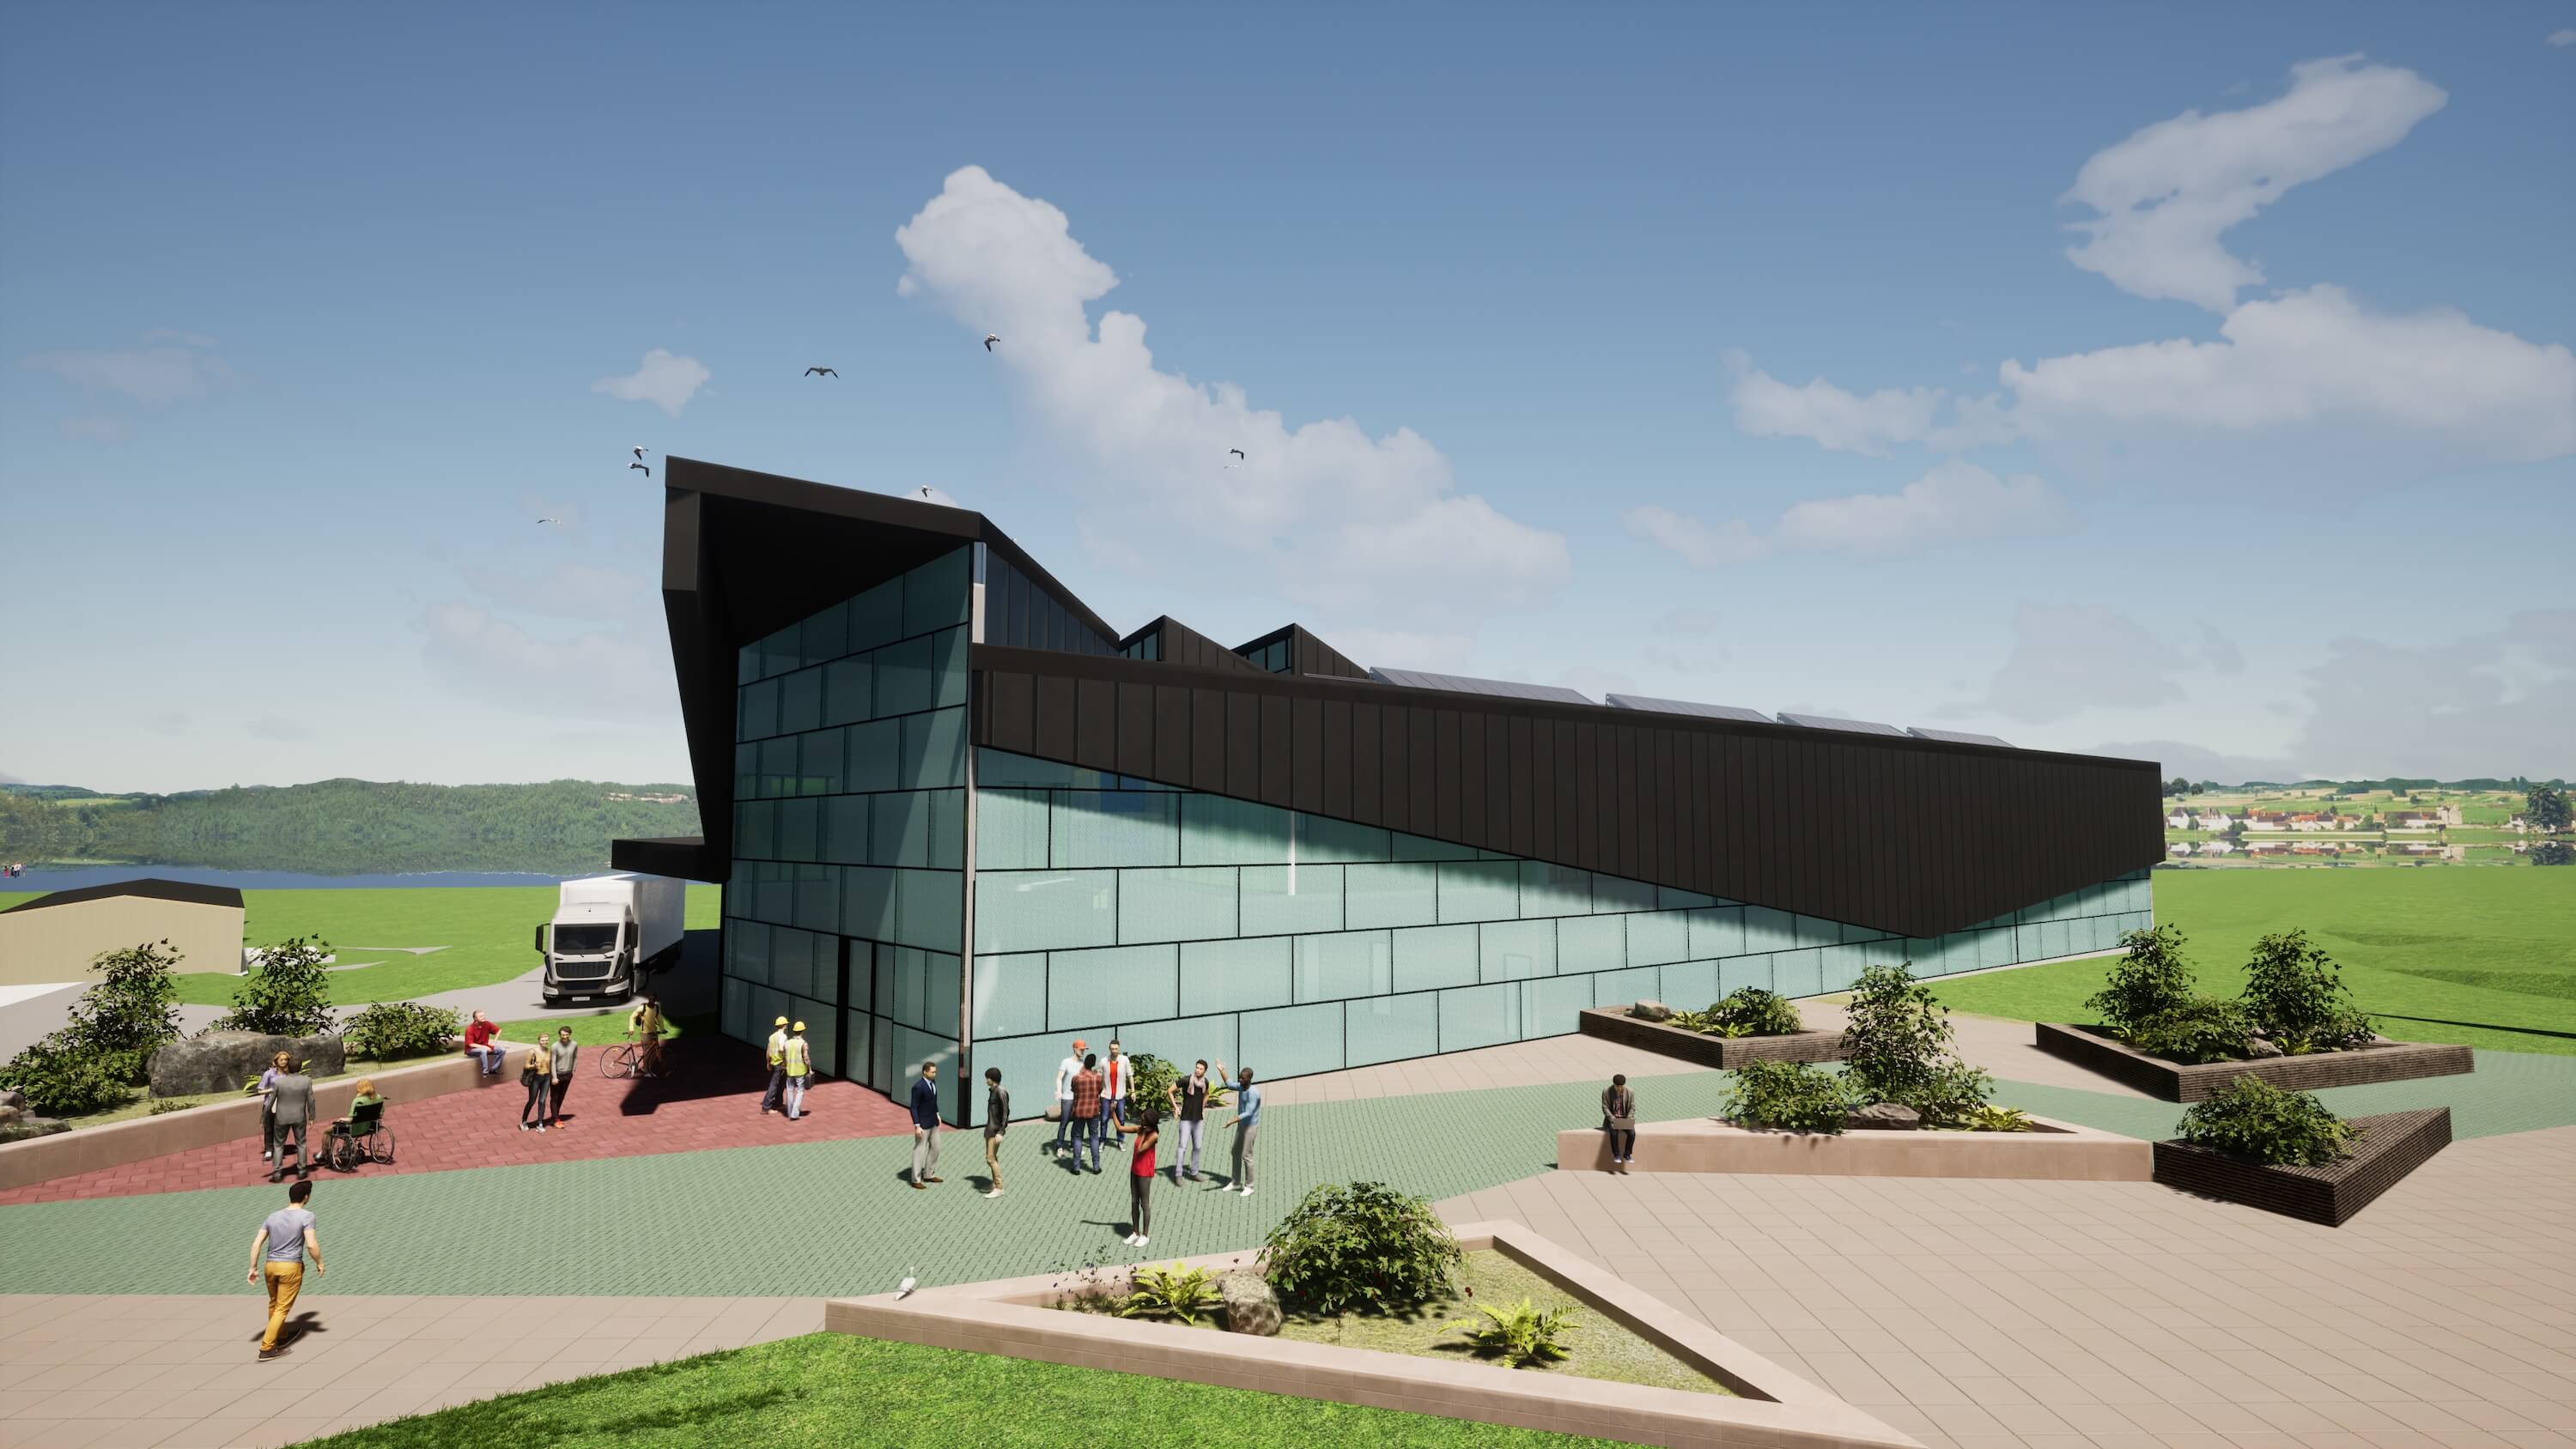 Artist's impression of an angled view of contemporary training facility, landscaped triangles alongside